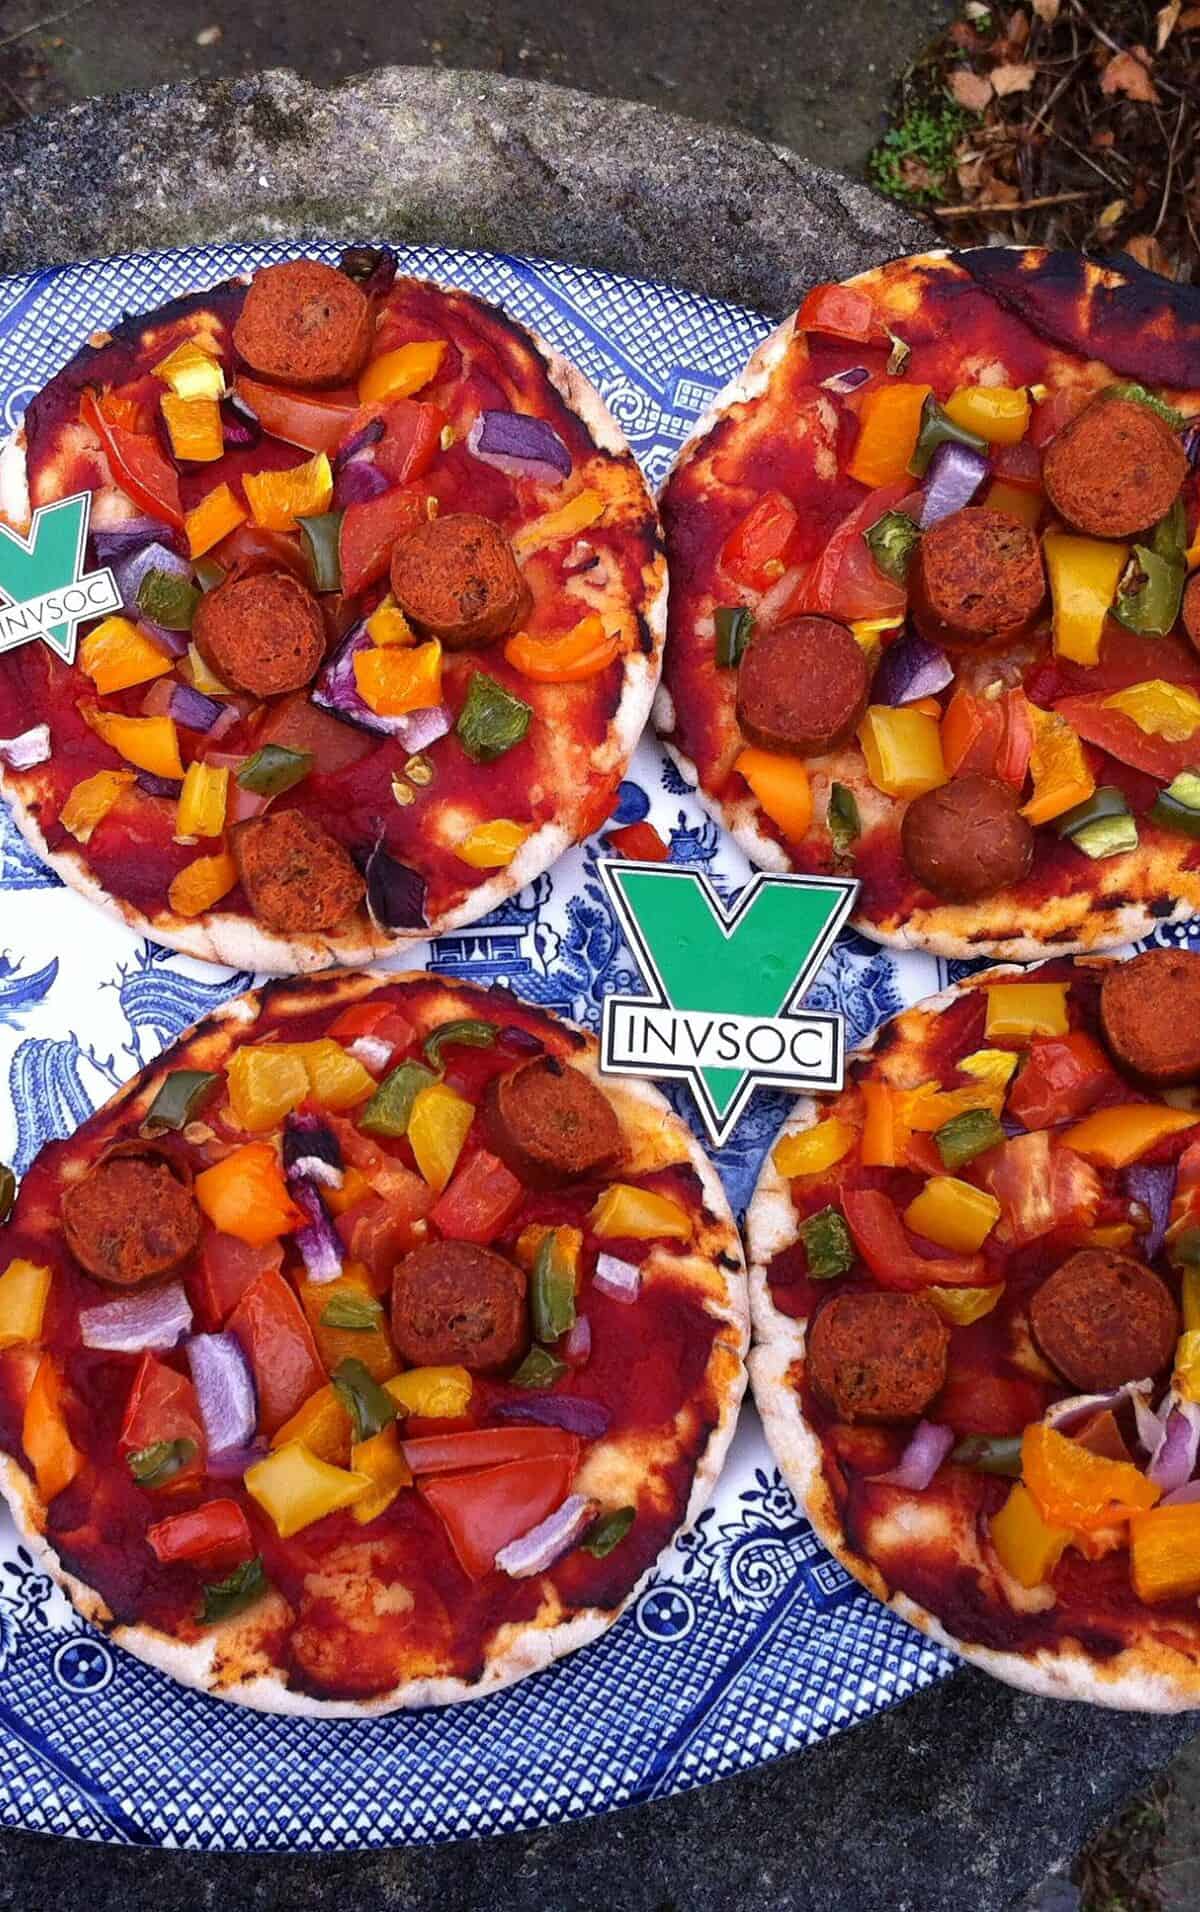  These pizzas are a fun activity for kids to help assemble and personalize.